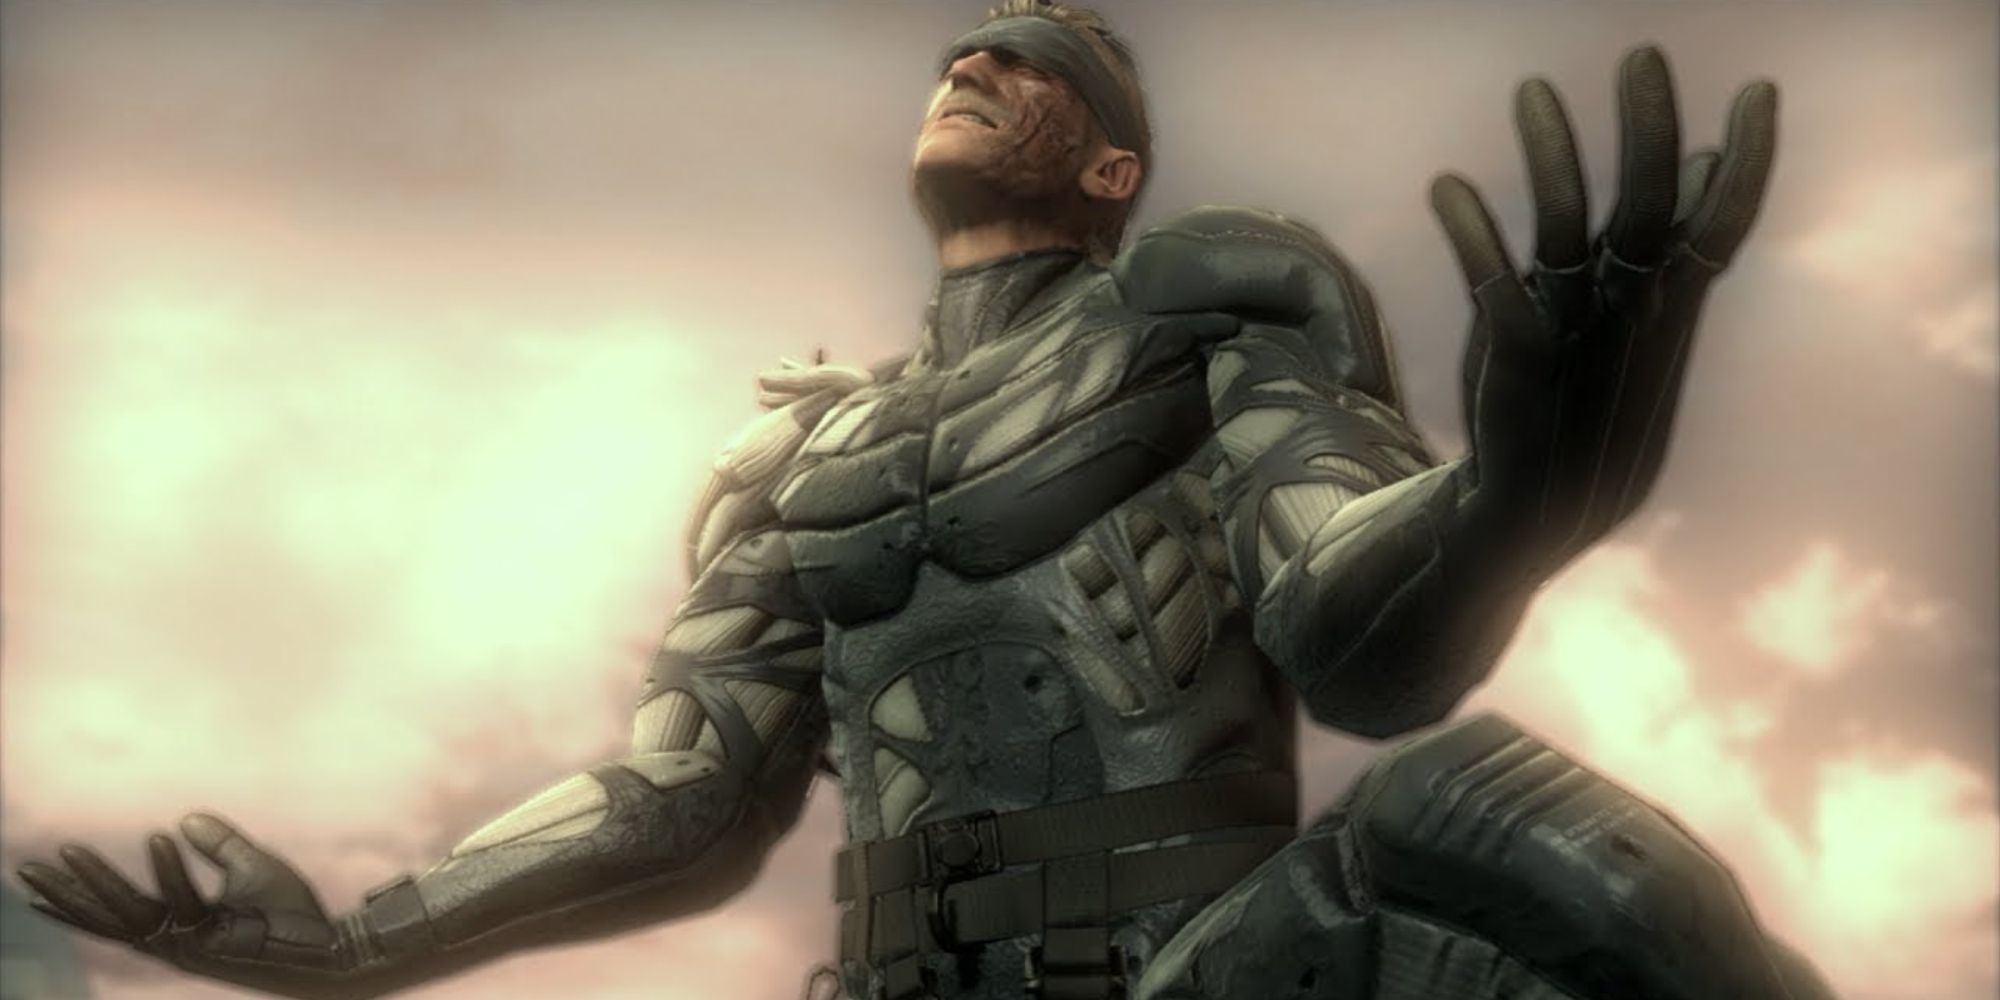 Metal Gear Solid 4 holds the world record for the longest cutscene